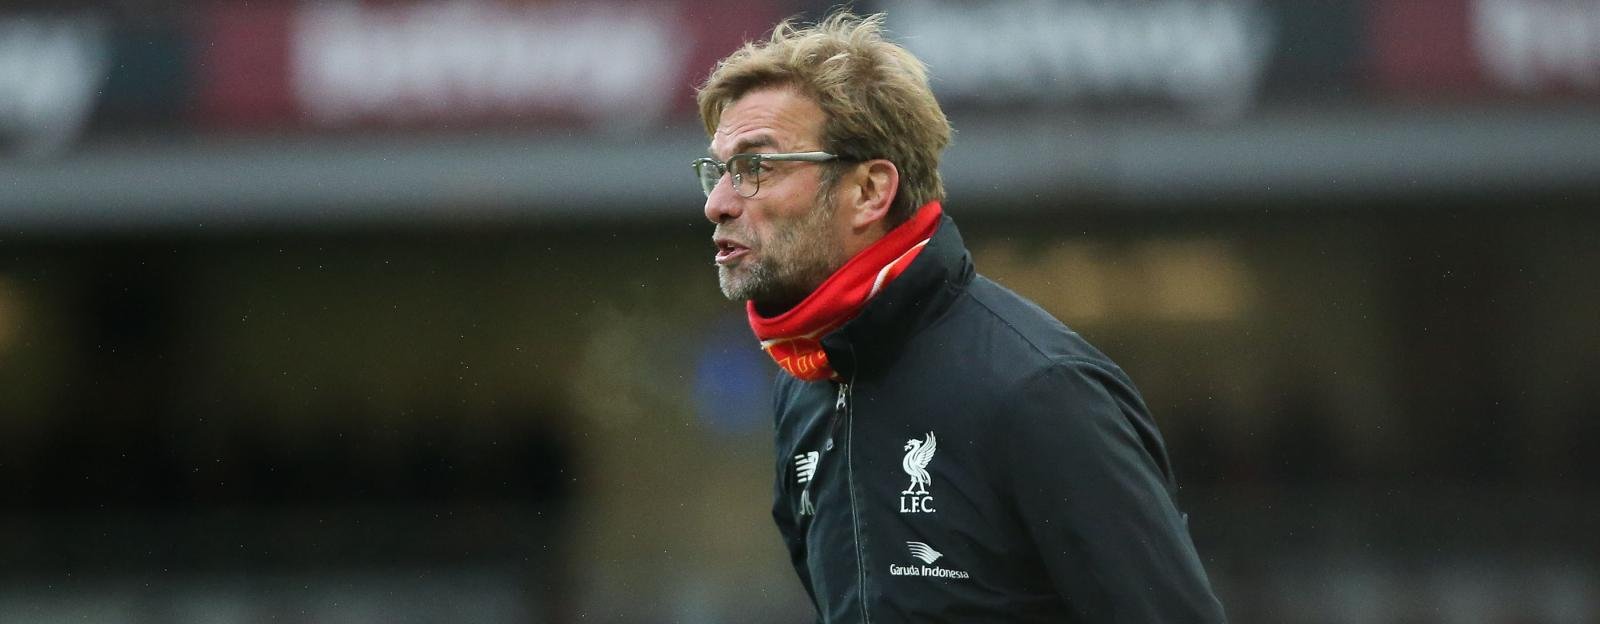 Klopp has endeared himself to Liverpool, but now he needs results